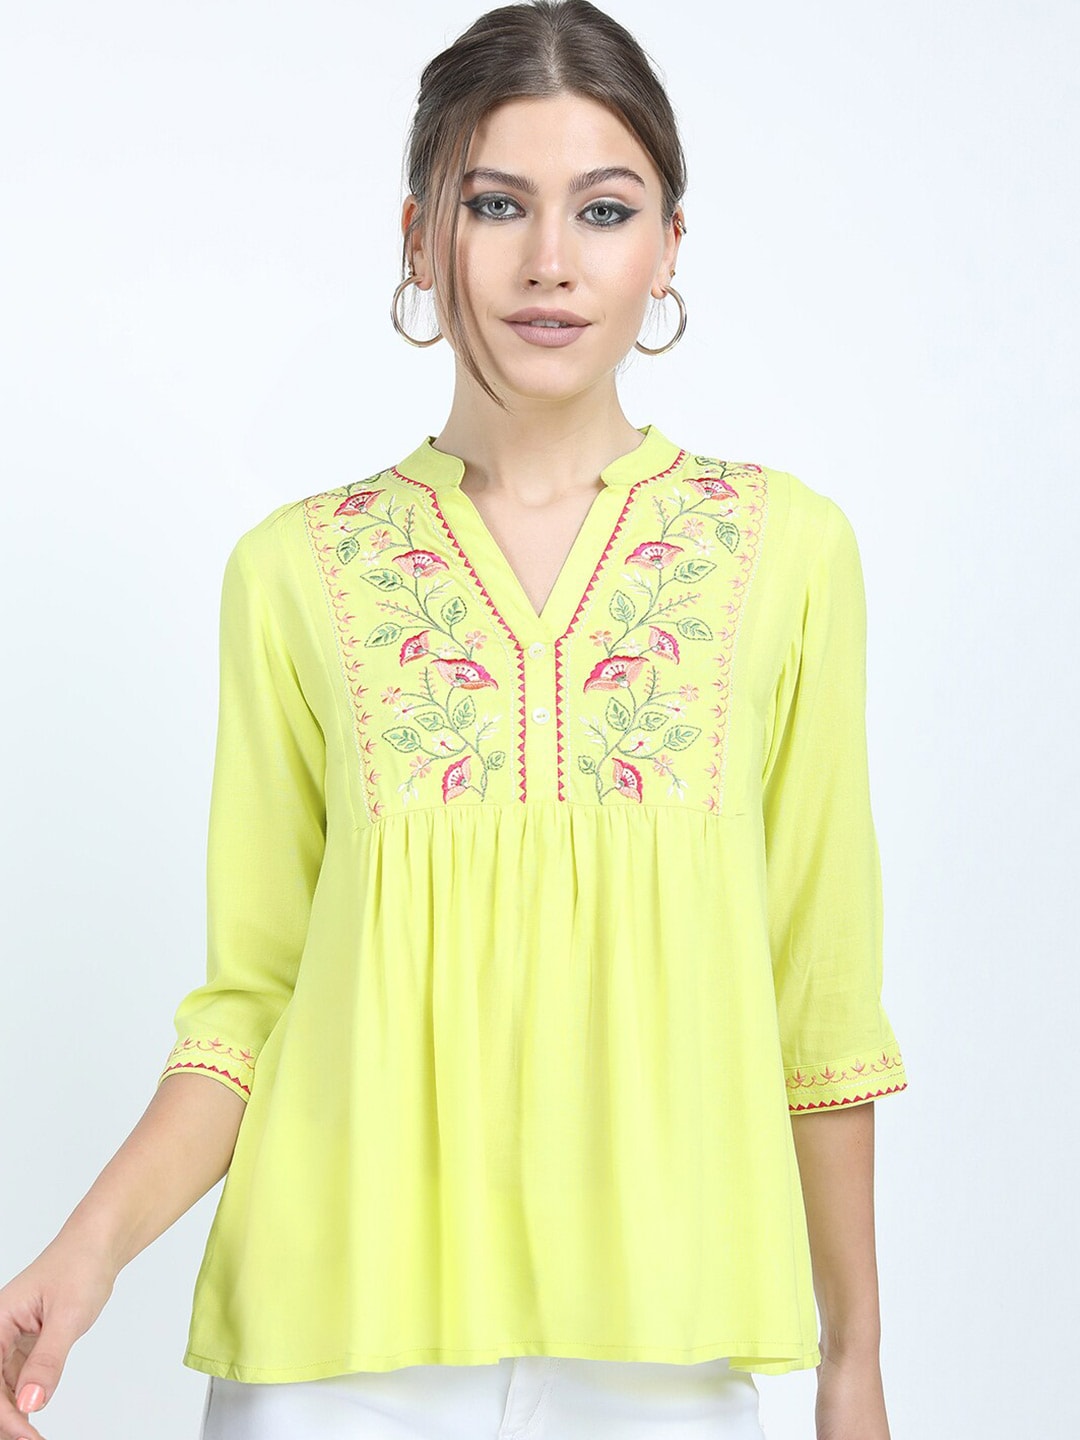 Vishudh Yellow Floral Embroidered Mandarin Collar Top Price in India